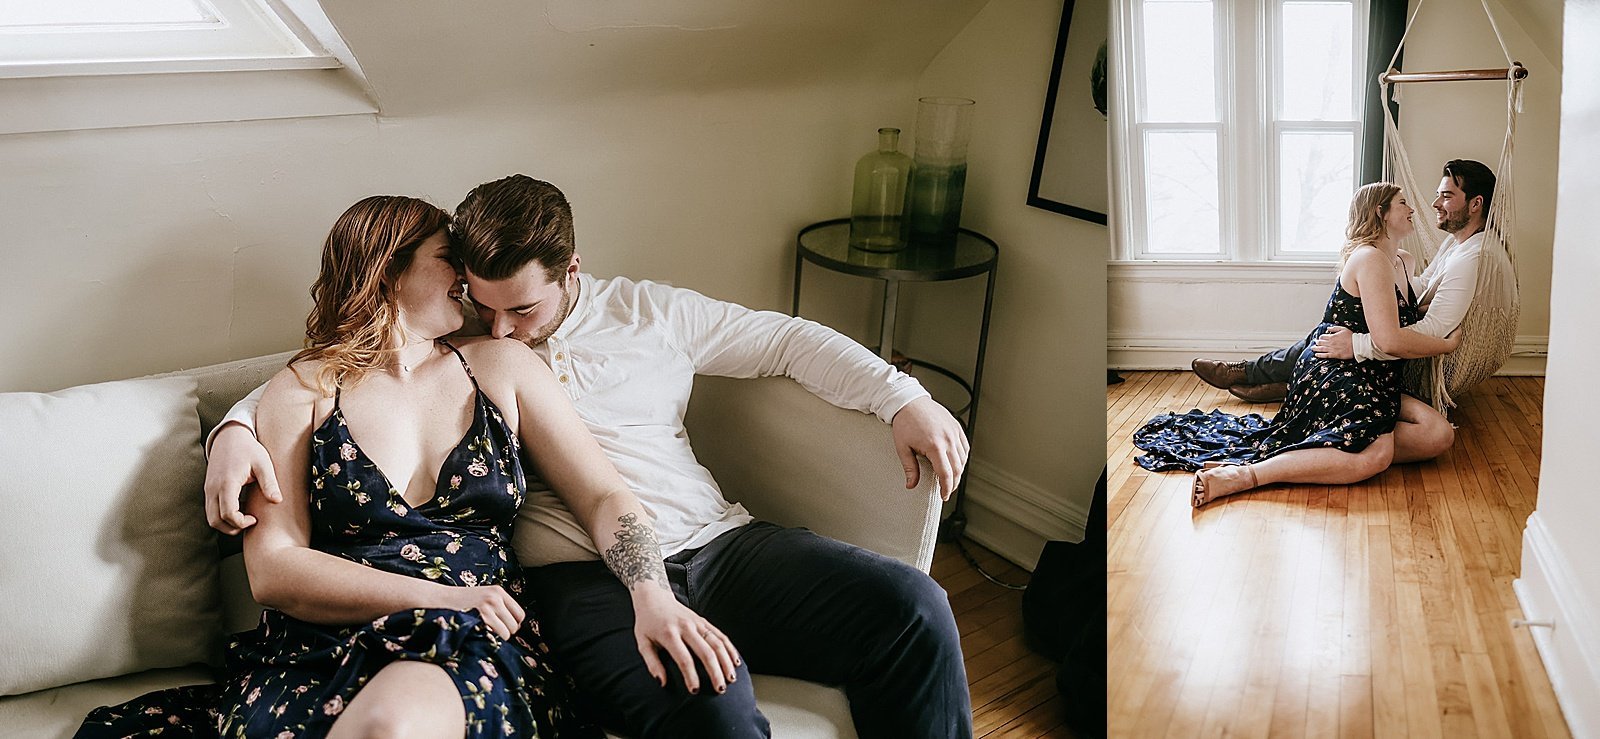  Couple sitting on the floor together under a window for photo shoot 